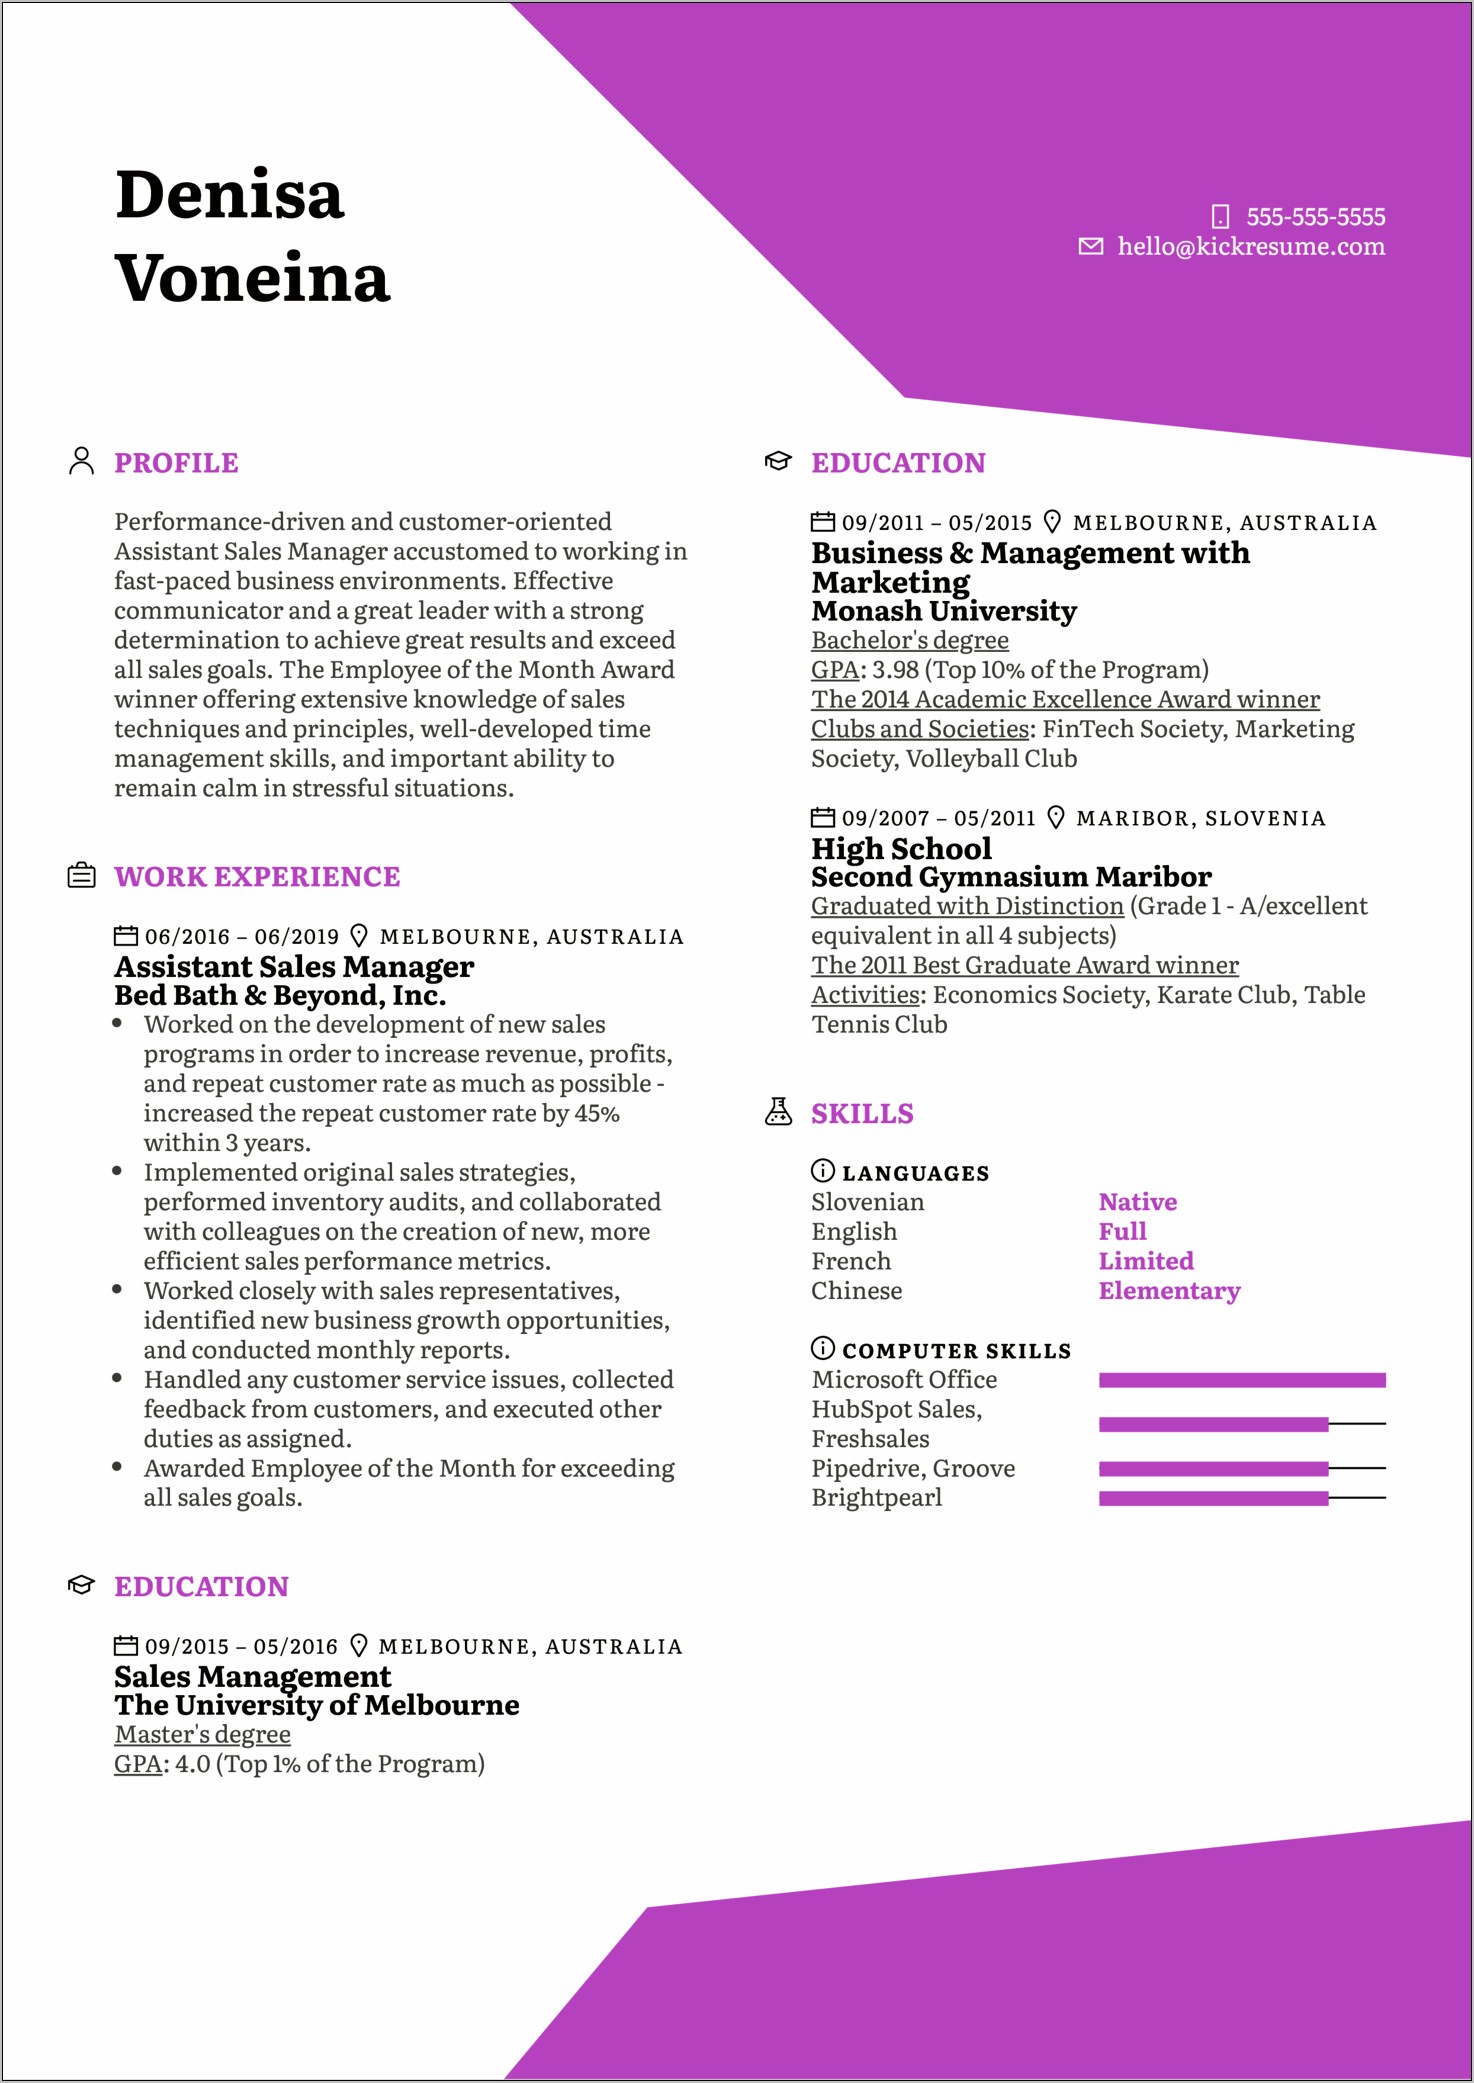 Resume Example Retail Store Leads